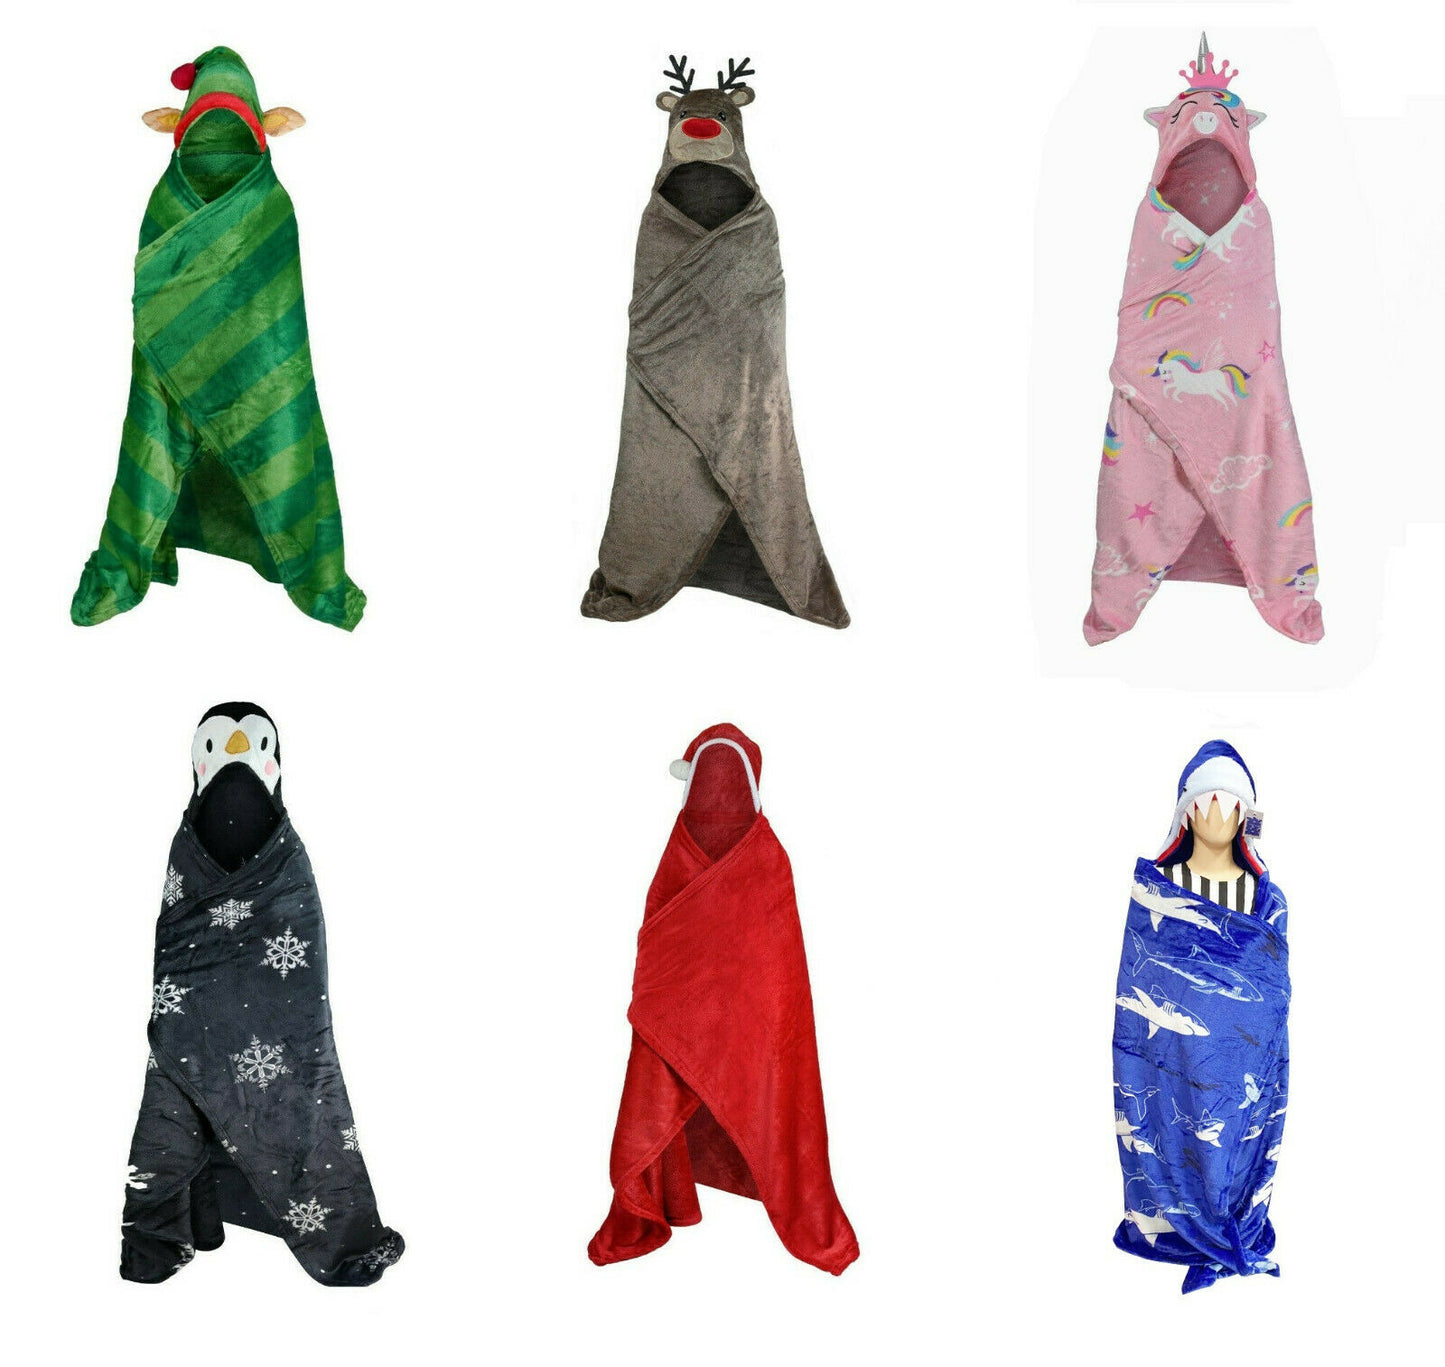 Children's Novelty Hooded Fleece Blanket, These Are Super Soft And Perfect For The Festive Season Or As A Gift, Elf, Santa,  Rudolph, Unicorn, Penguin, Shark Designs, They Measure 110cm x140cm 100% Polyester (Excludes Trimming)